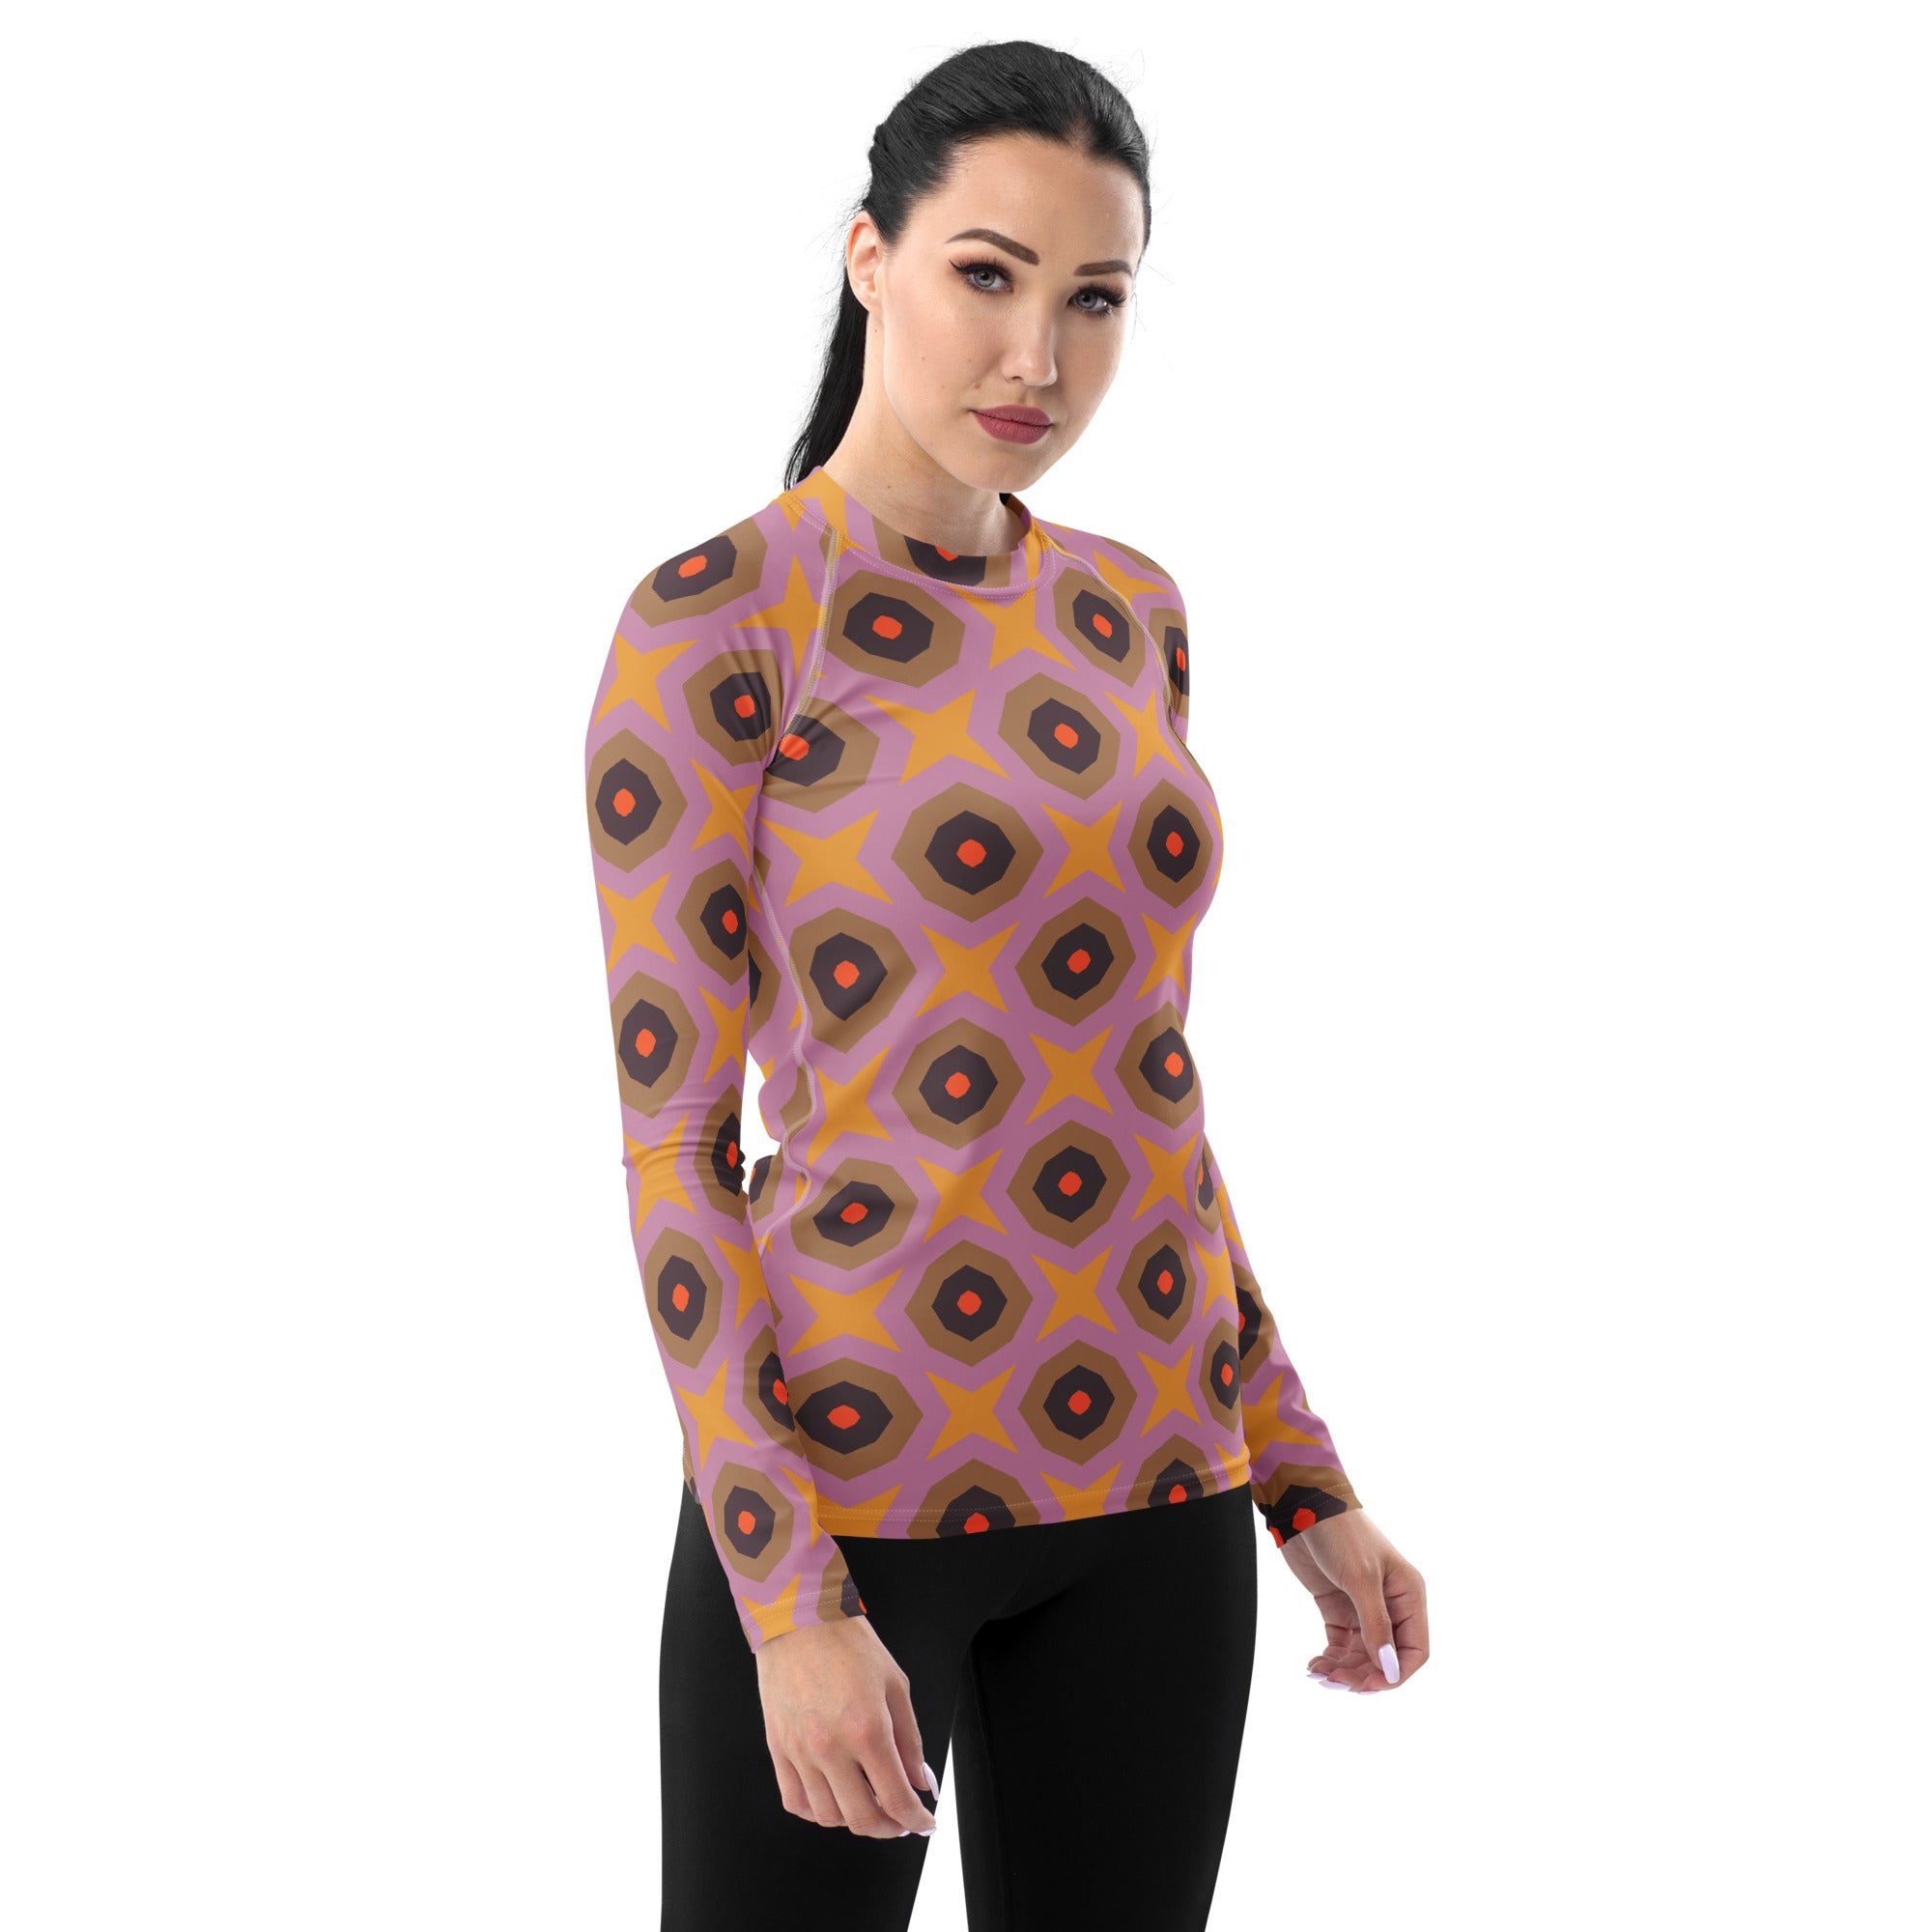 Women's rash guard with vibrant abstract artwork